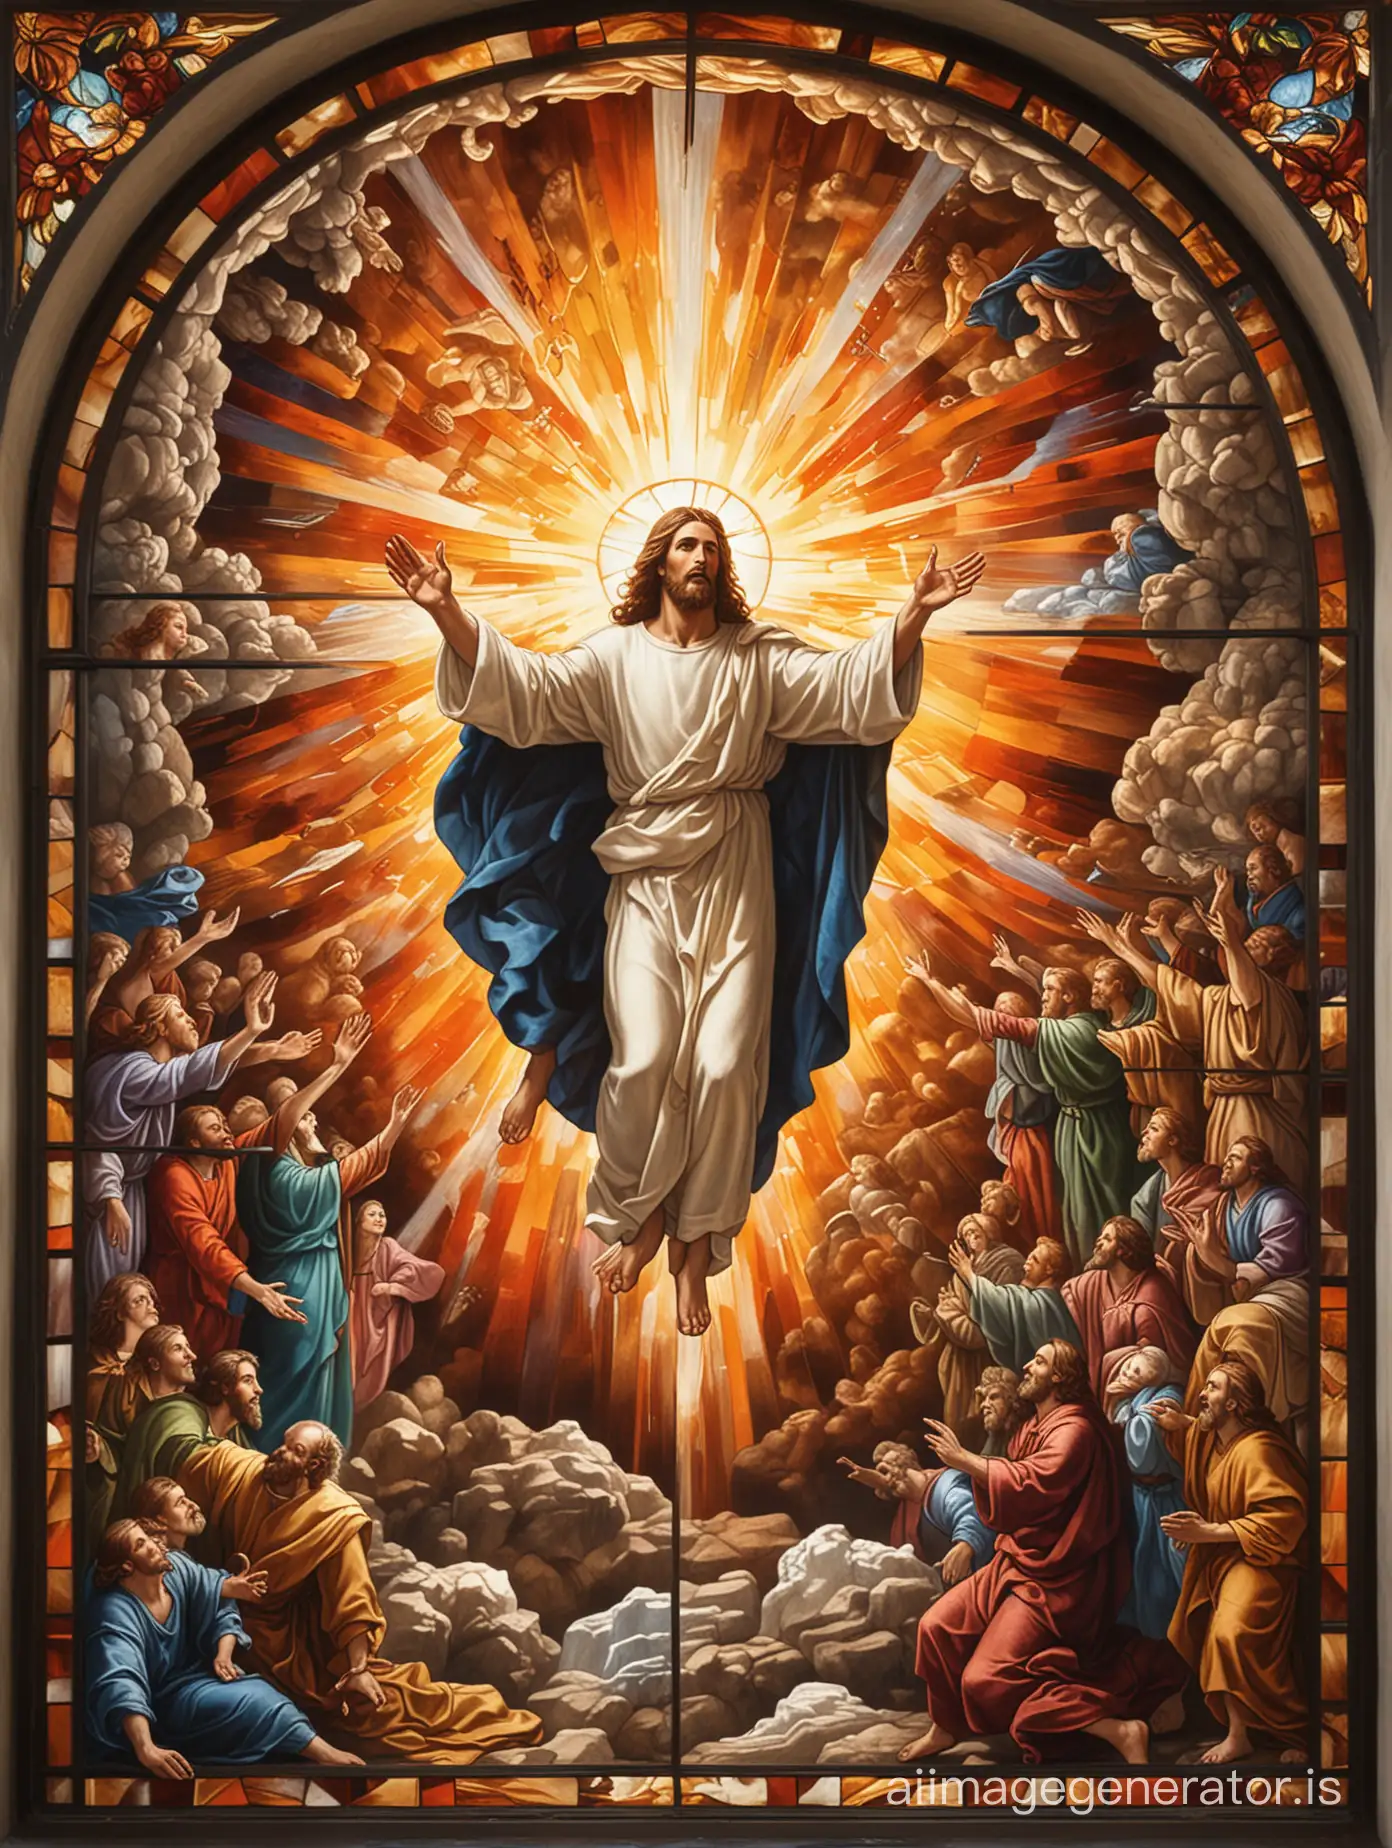 oil painting depiction of the resurrection of Jesus surrounded by an explosion of light depicted as vibrant stained-glass window